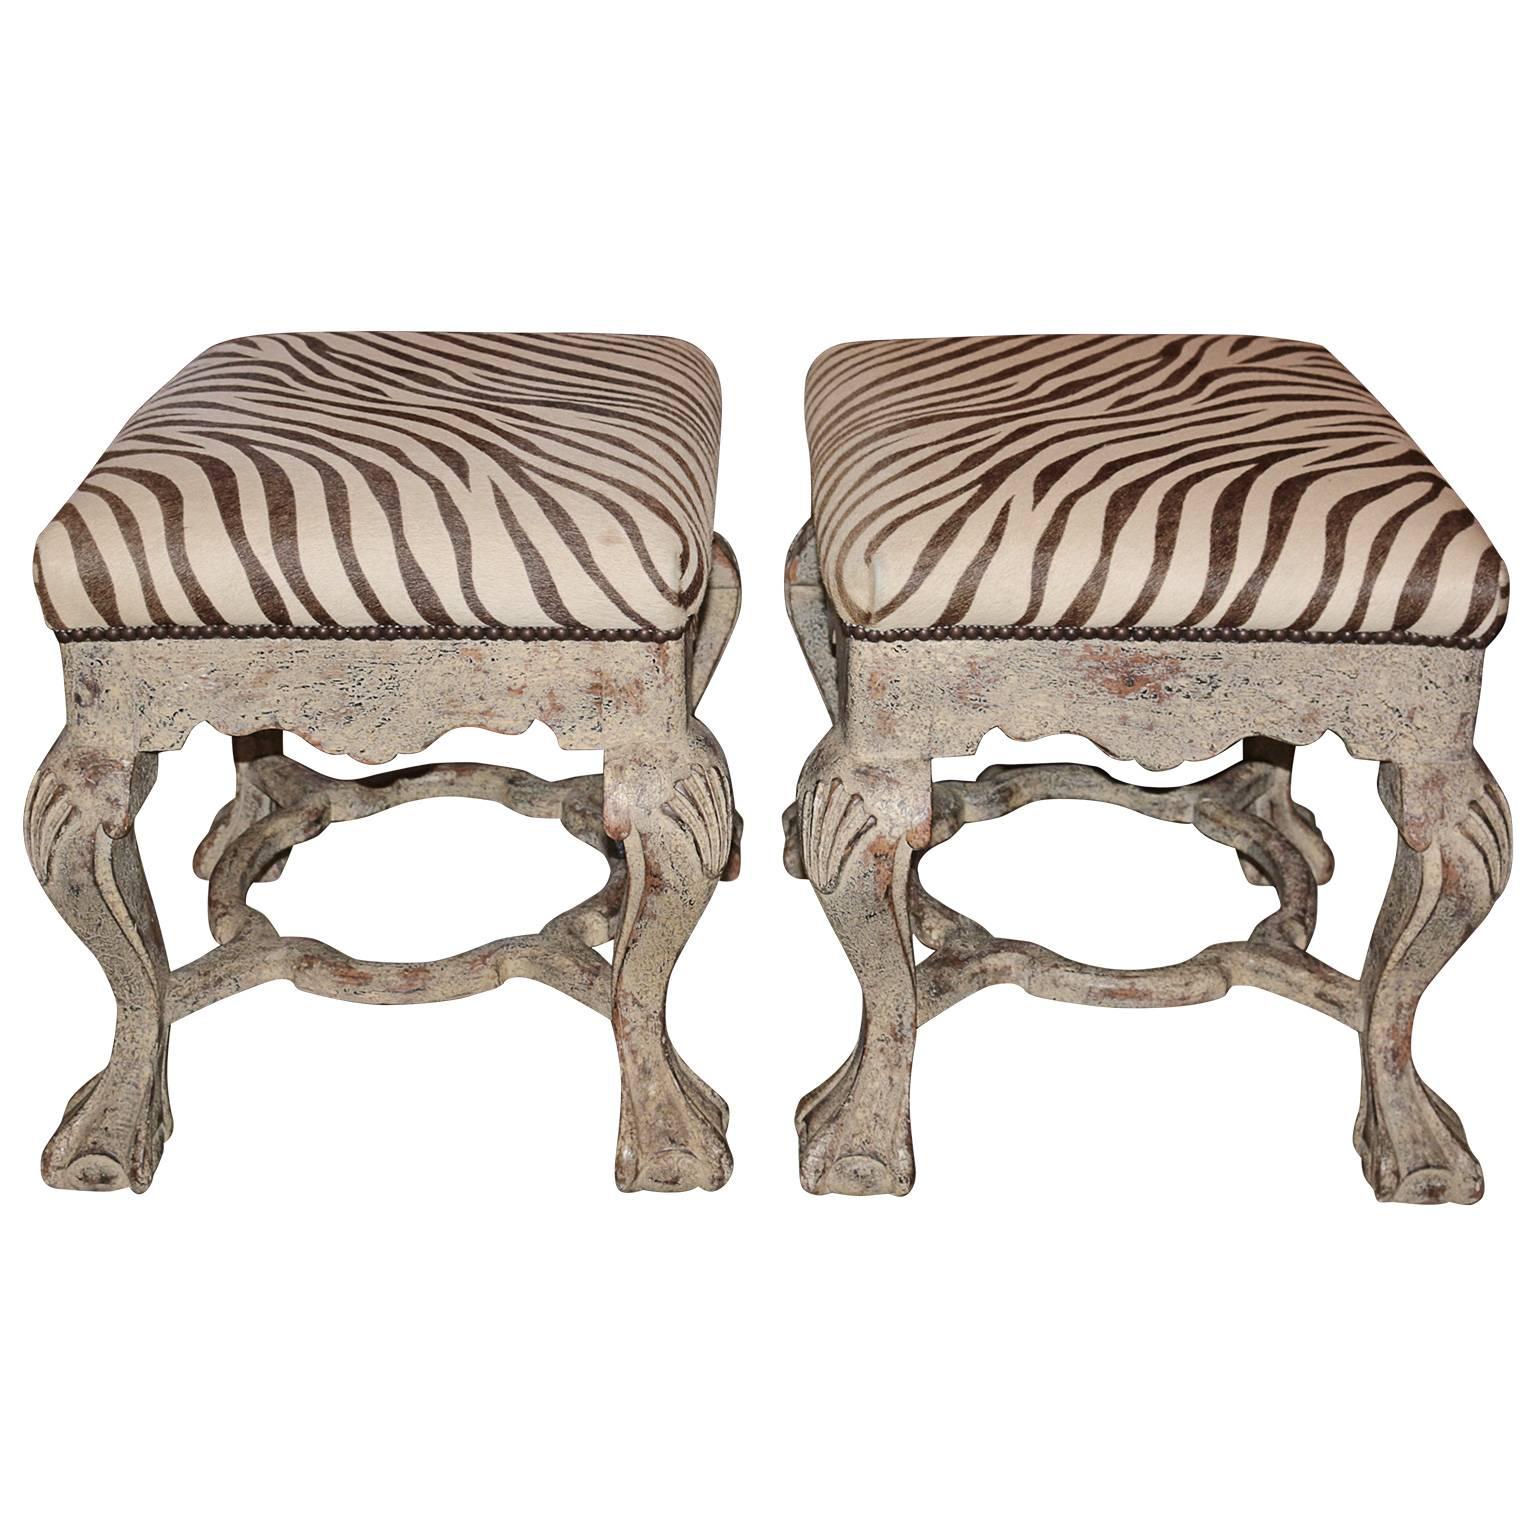 Hand-Carved Pair of 1960s Printed Italian Zebra Striped Foot Stools